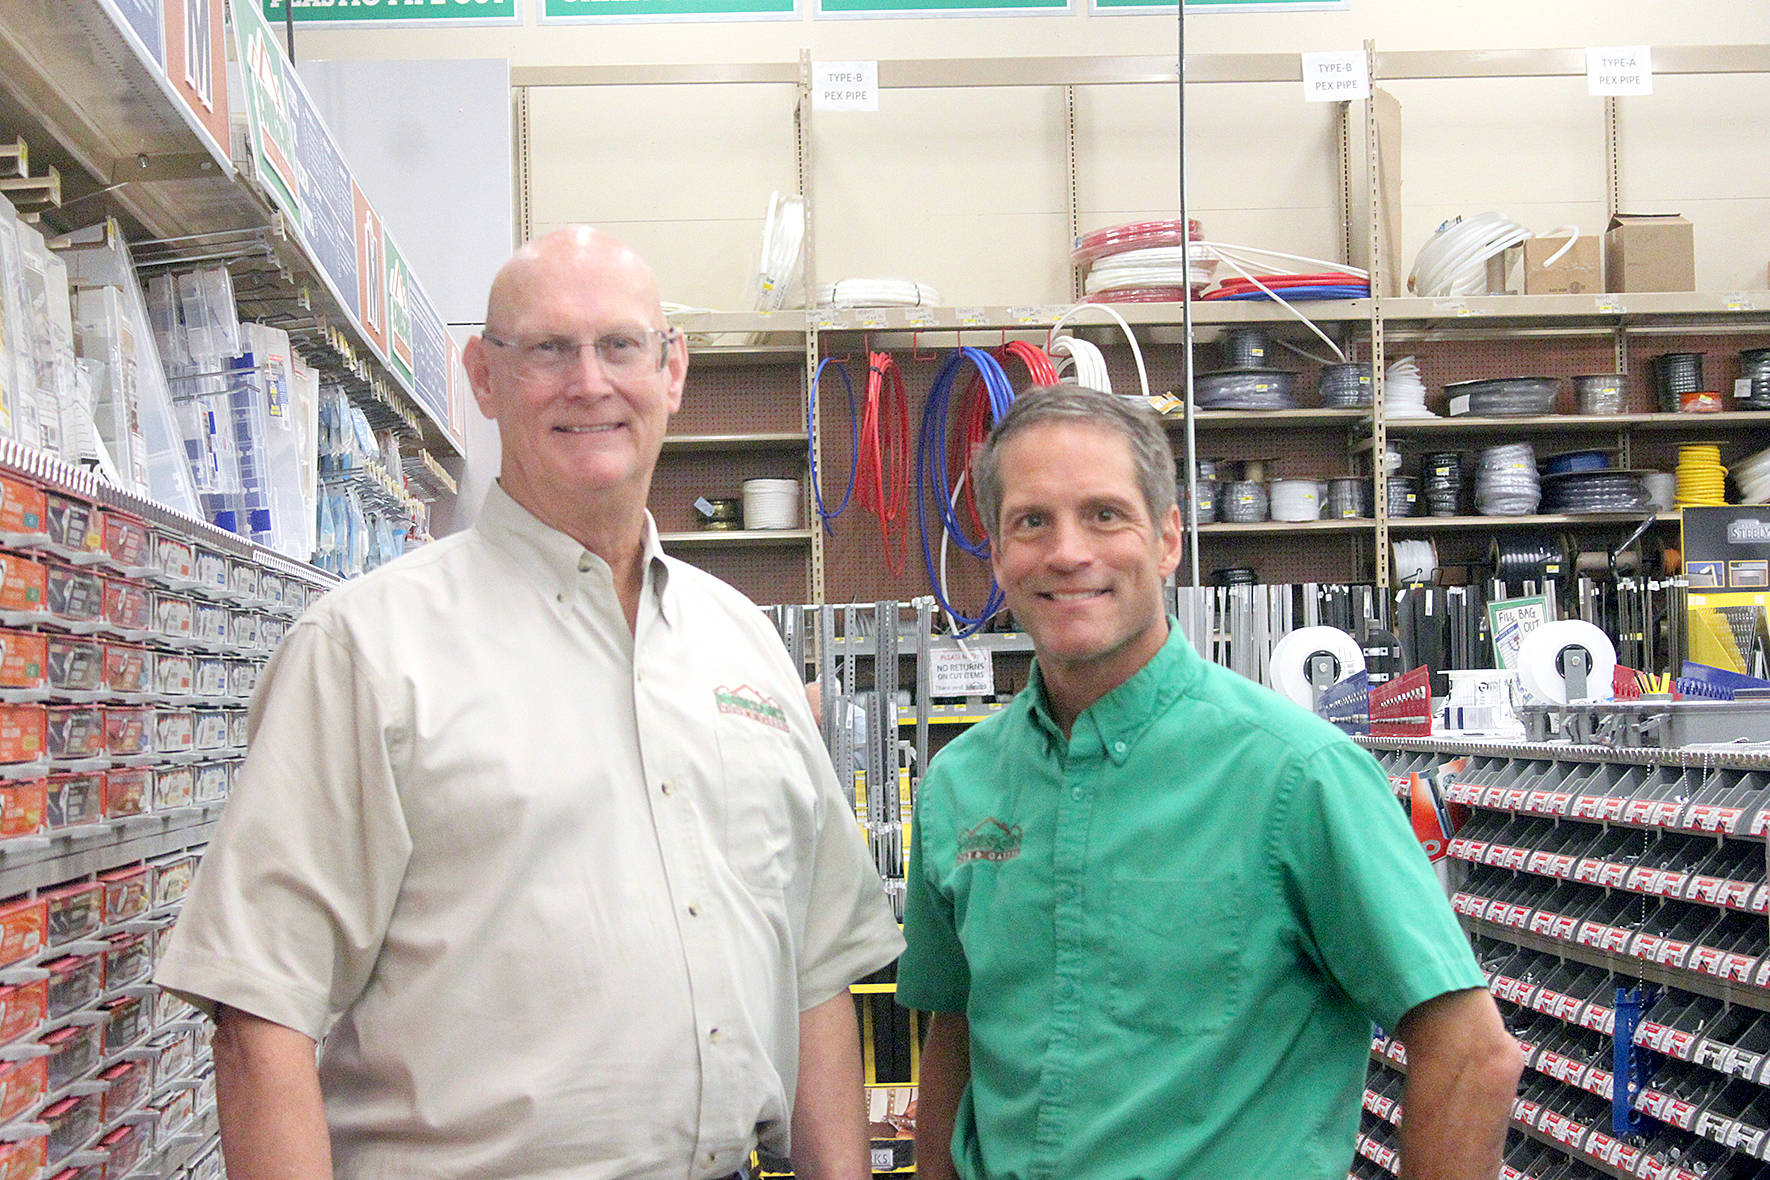 President of Johnson Home and Garden, Brad Johnson (right) stands with his uncle and vice president J. Johnson (left) near their large selection of fasteners. J. Johnson said the store has the largest selection of fasteners in the entire country. Photo by Danielle Chastaine